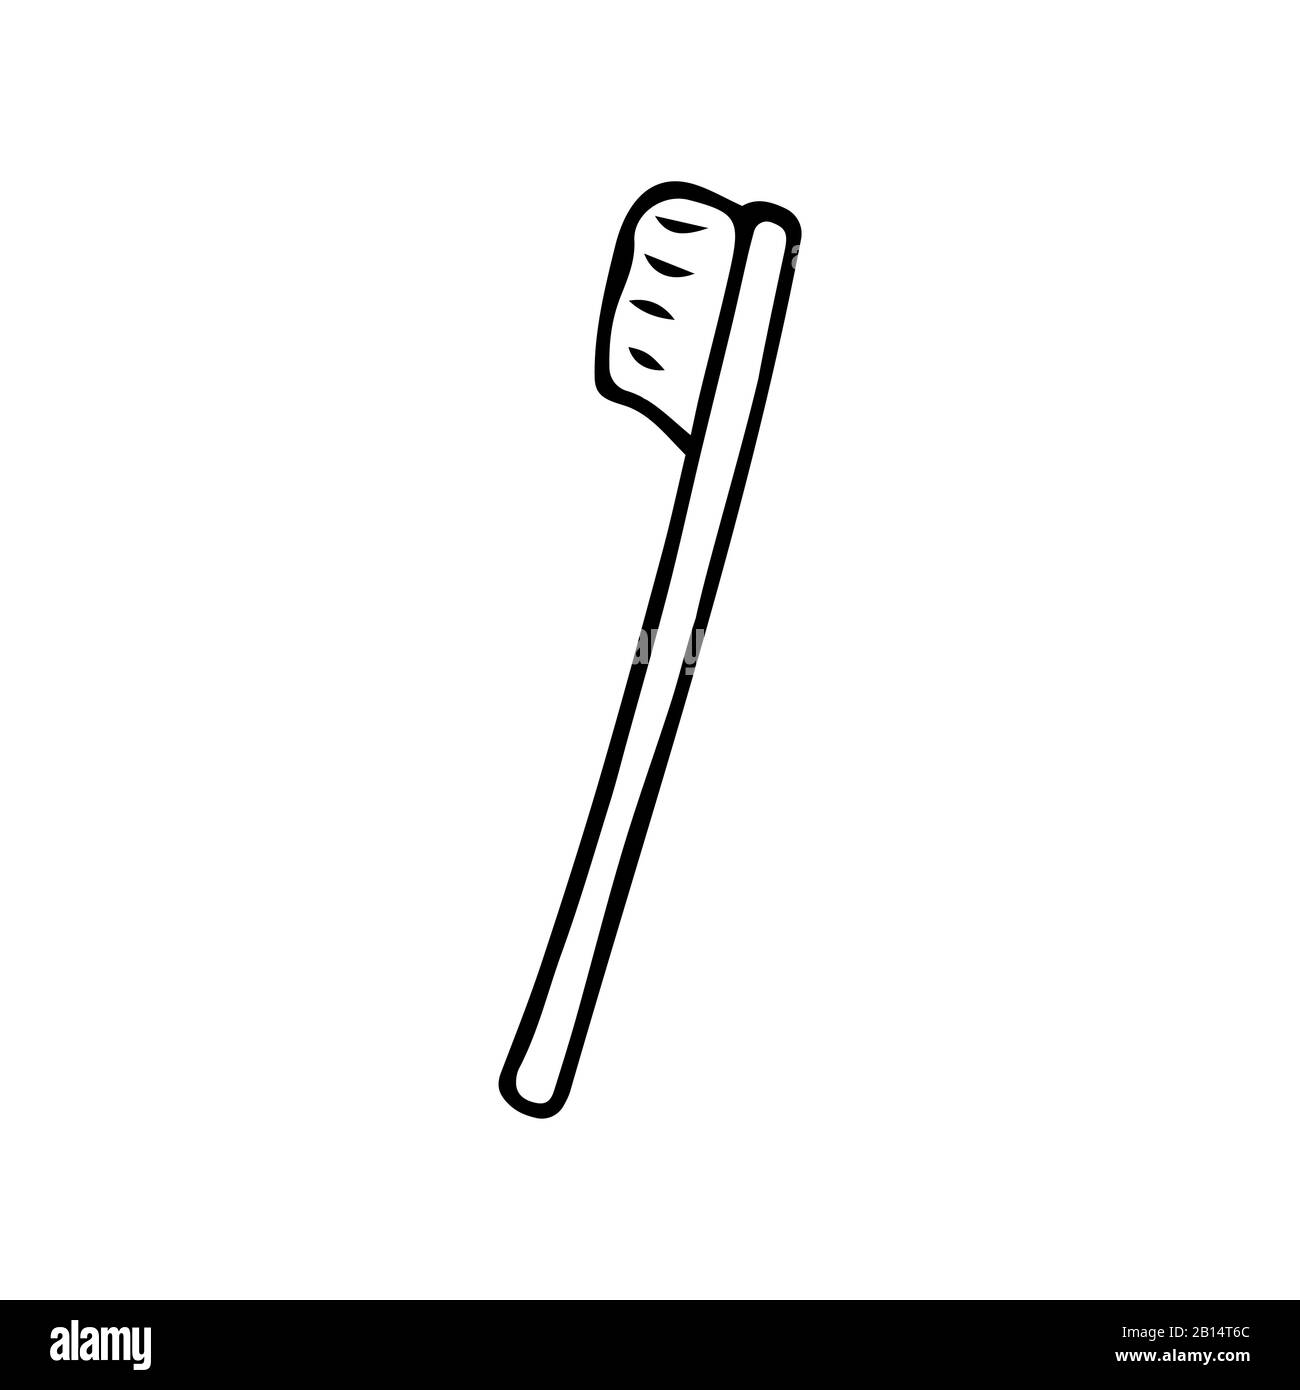 Toothbrush. Bathroom accessories made of bamboo. Eco-friendly. Black and white illustration on a white background in doodle style Stock Vector